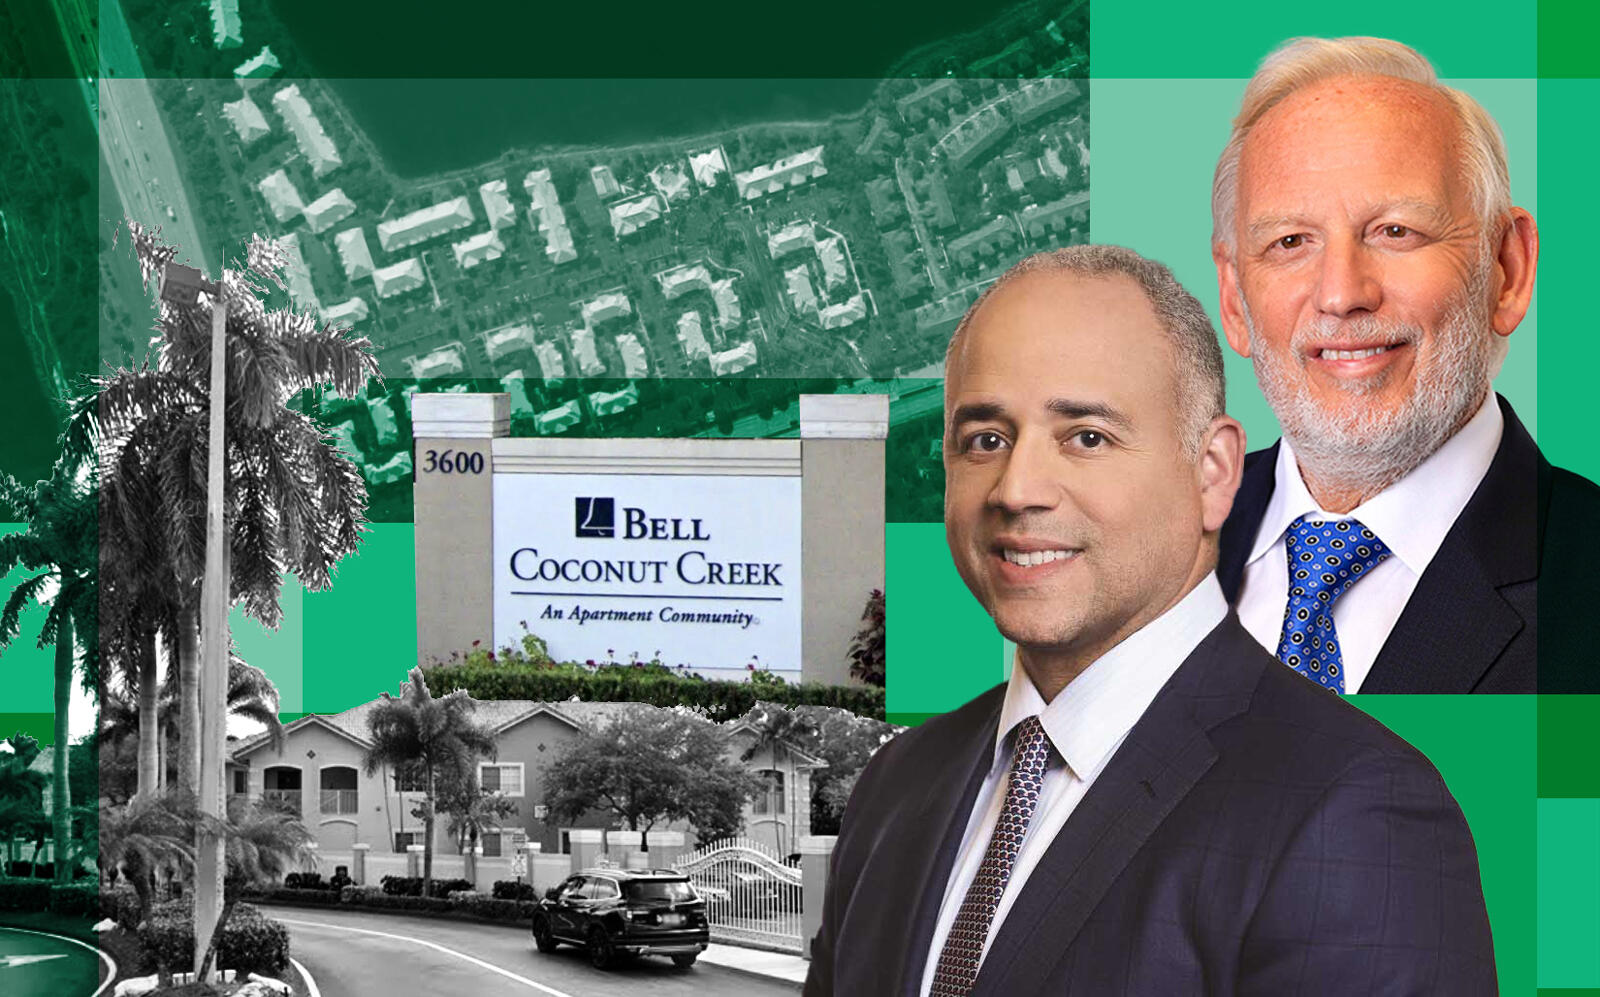 Coconut Creek Apartment Homes at 3621 Hillsboro Boulevard in Coconut Creek with Nuveen CEO Jose Minaya and Bar Invest CEO Jacques Barbera (Google Maps, Nuveen. Bar Invest)